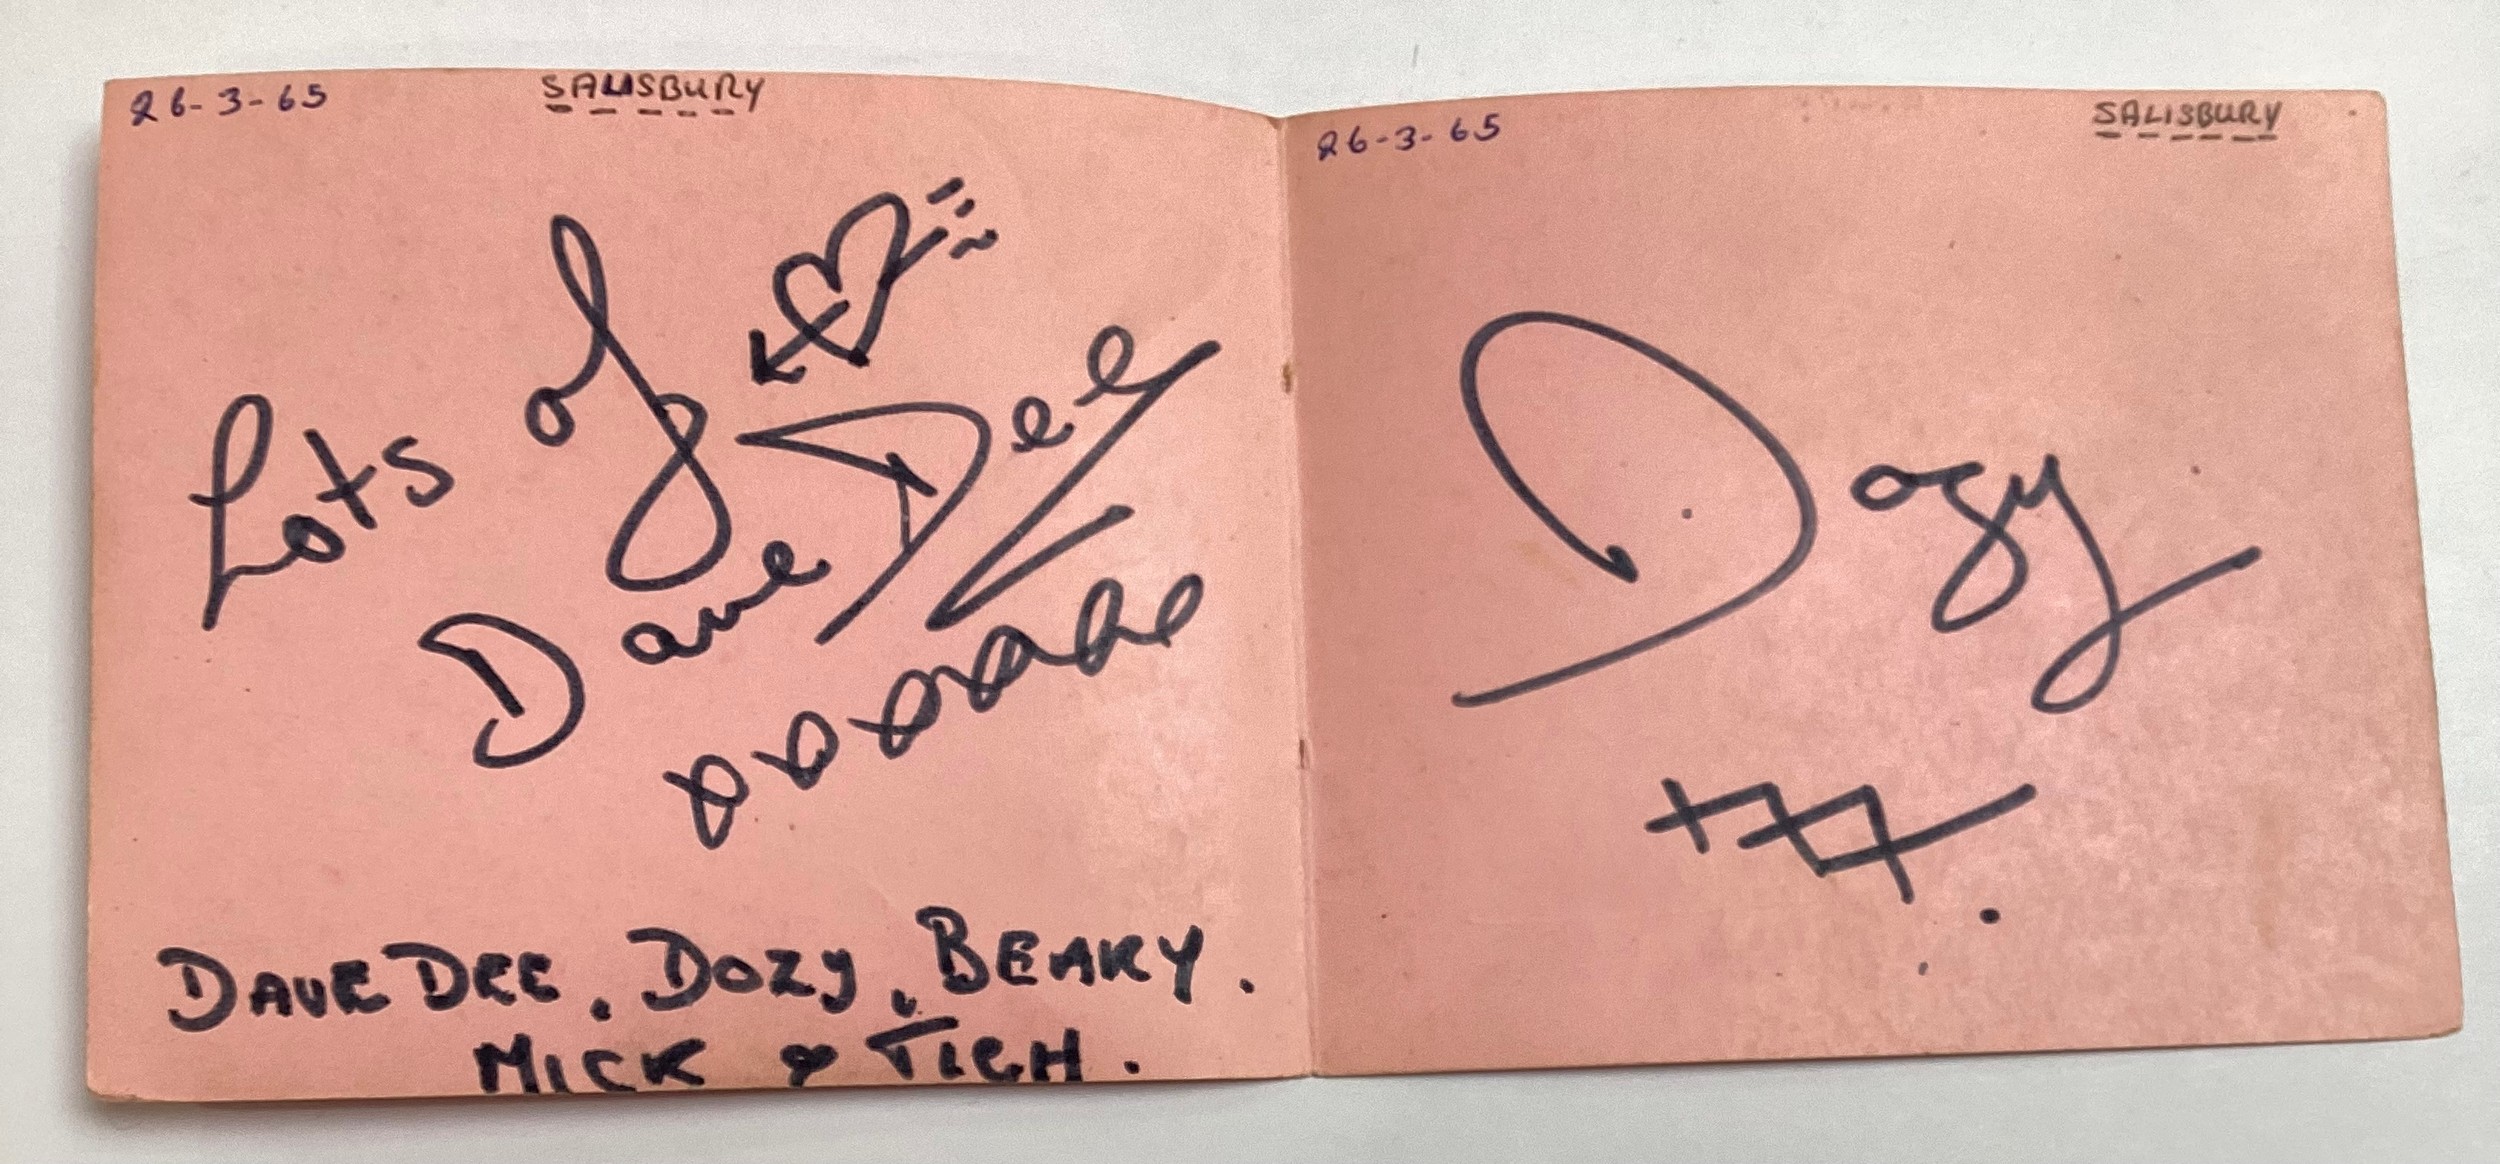 GENUINE 1960’S AUTOGRAPH BOOK CONTAINING VARIOUS POP / ROCK STARS. The book has seen better days - Image 11 of 14